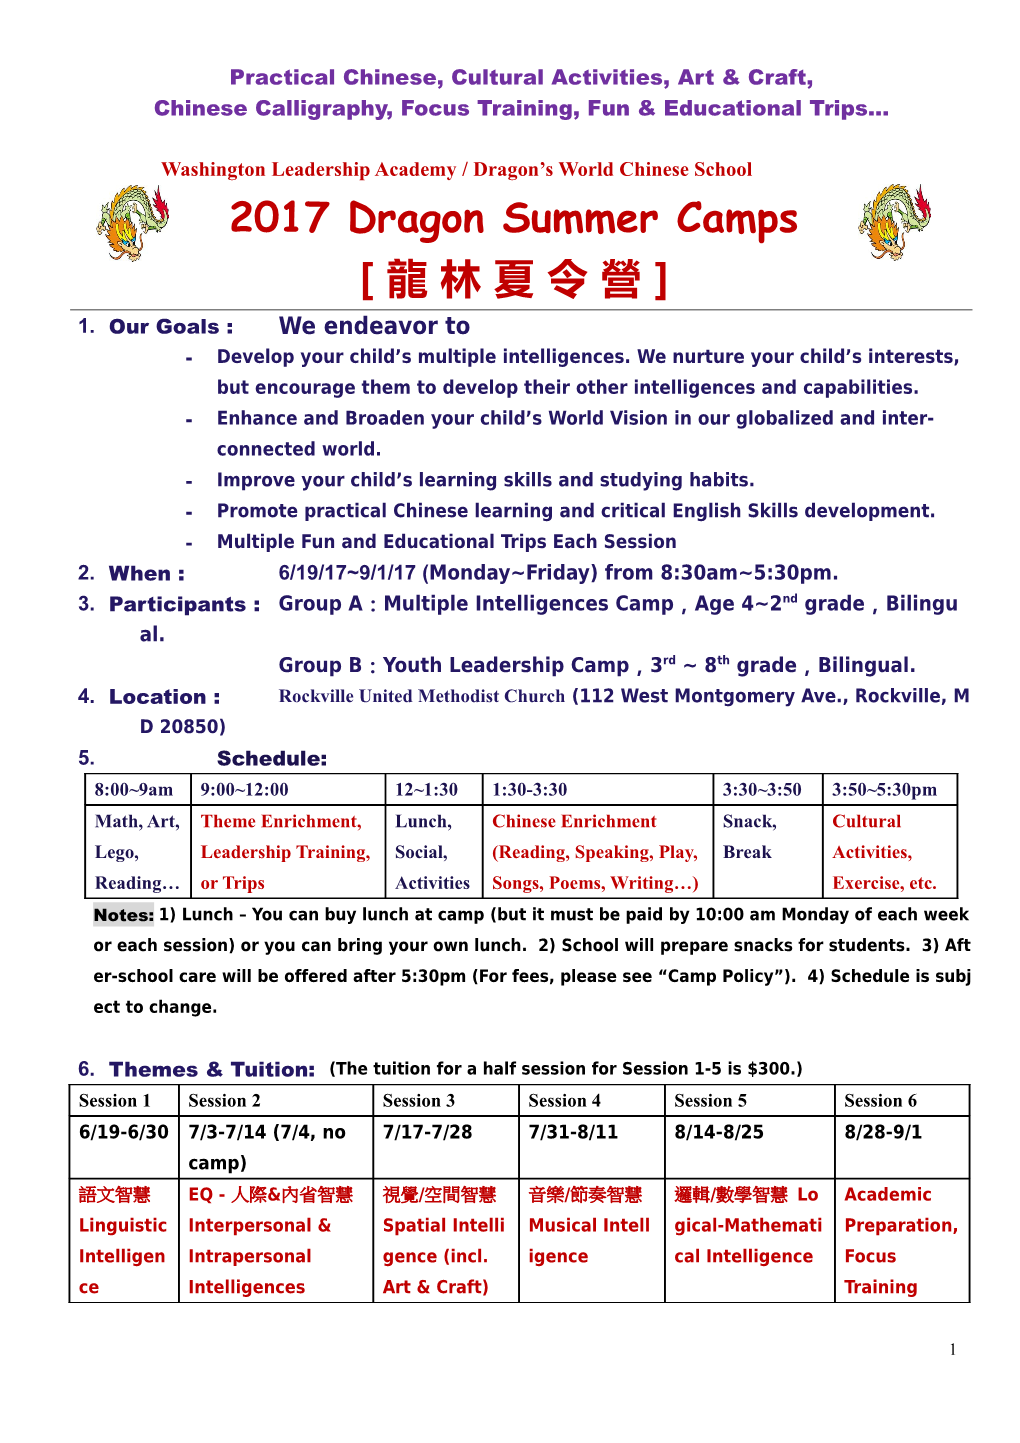 Practical Chinese, Cultural Activities, Art & Craft